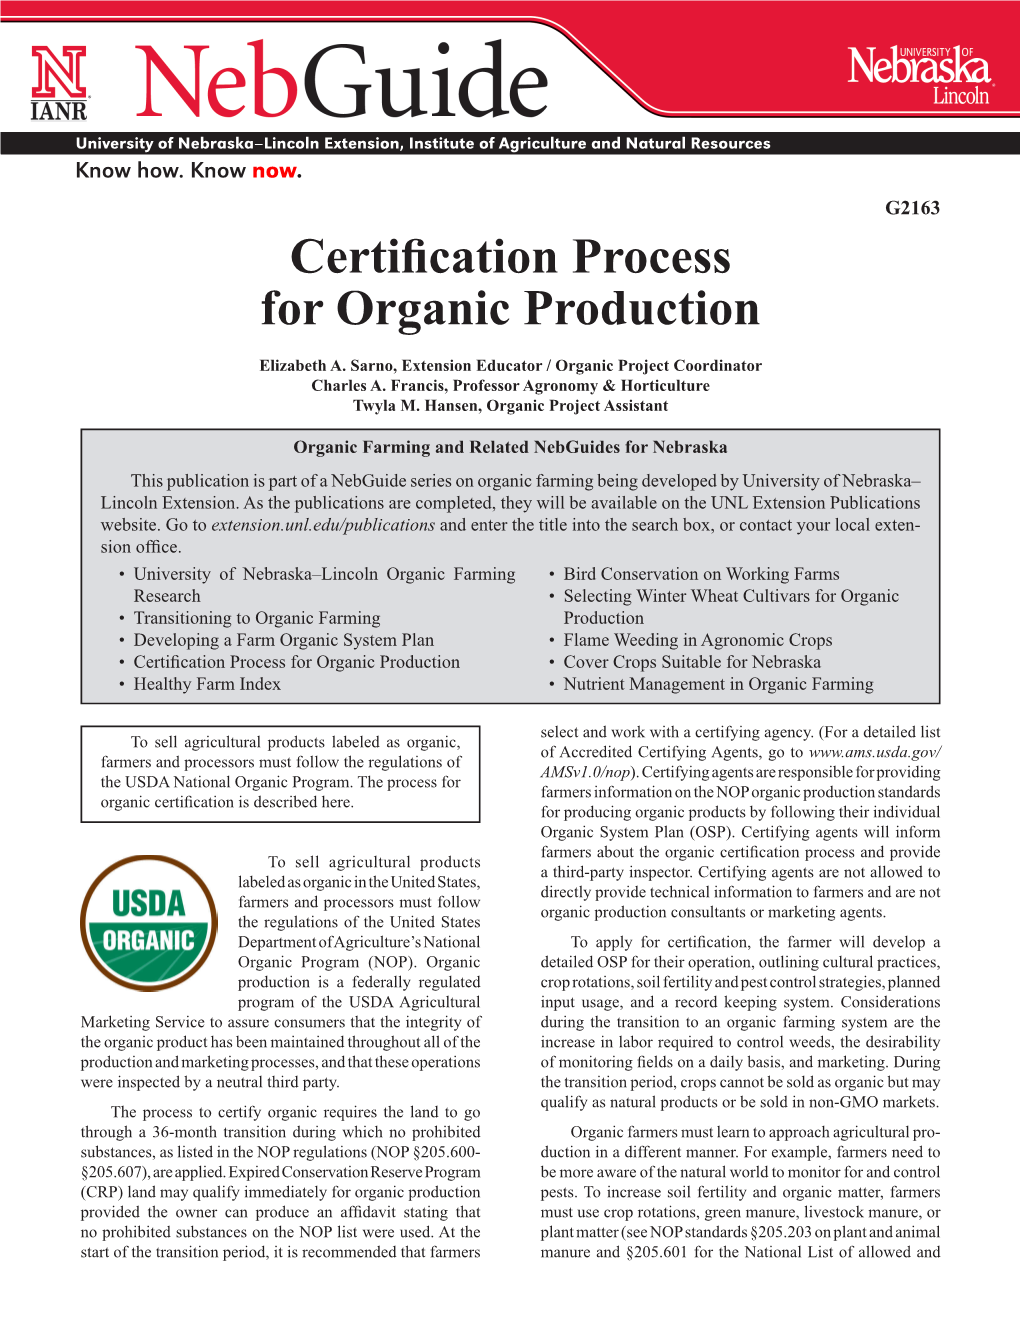 Certification Process for Organic Production